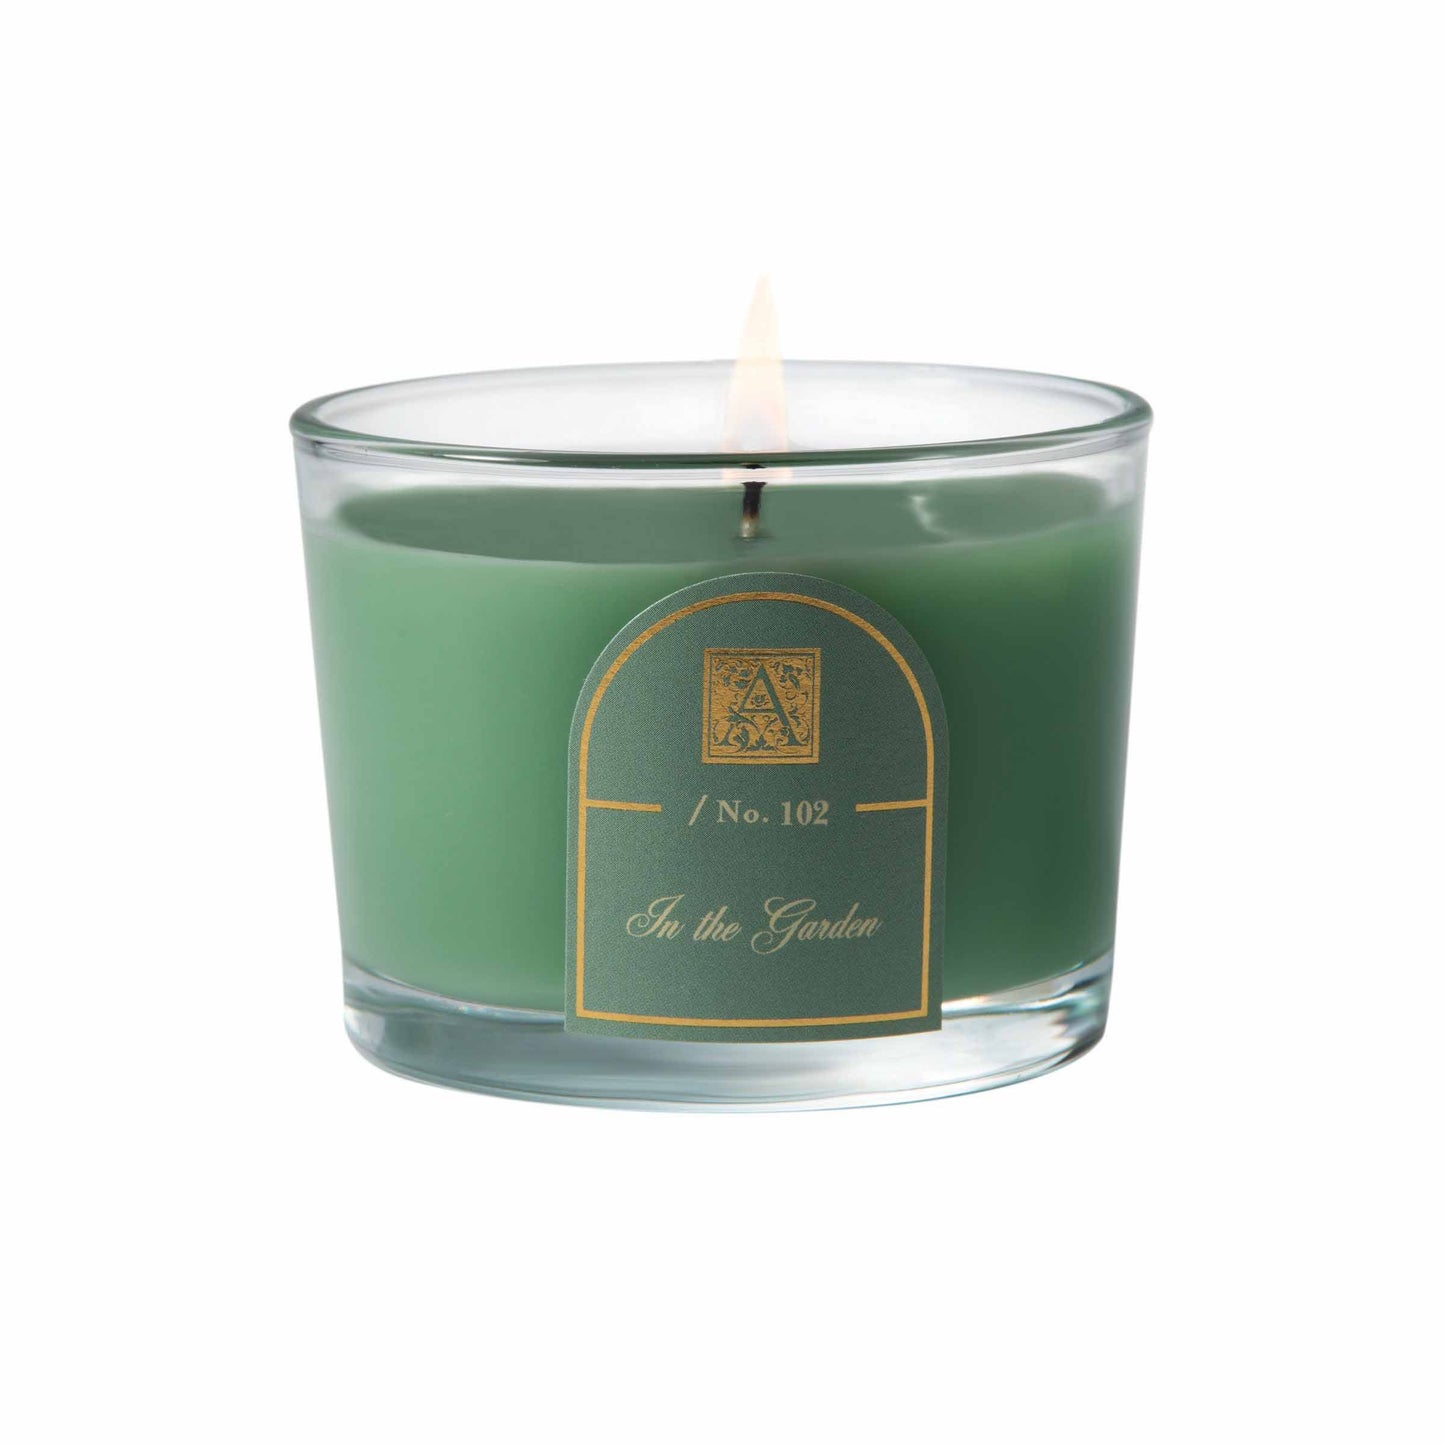 IN THE GARDEN Aromatique Petite Tumbler 4.5 oz Scented Jar Candle